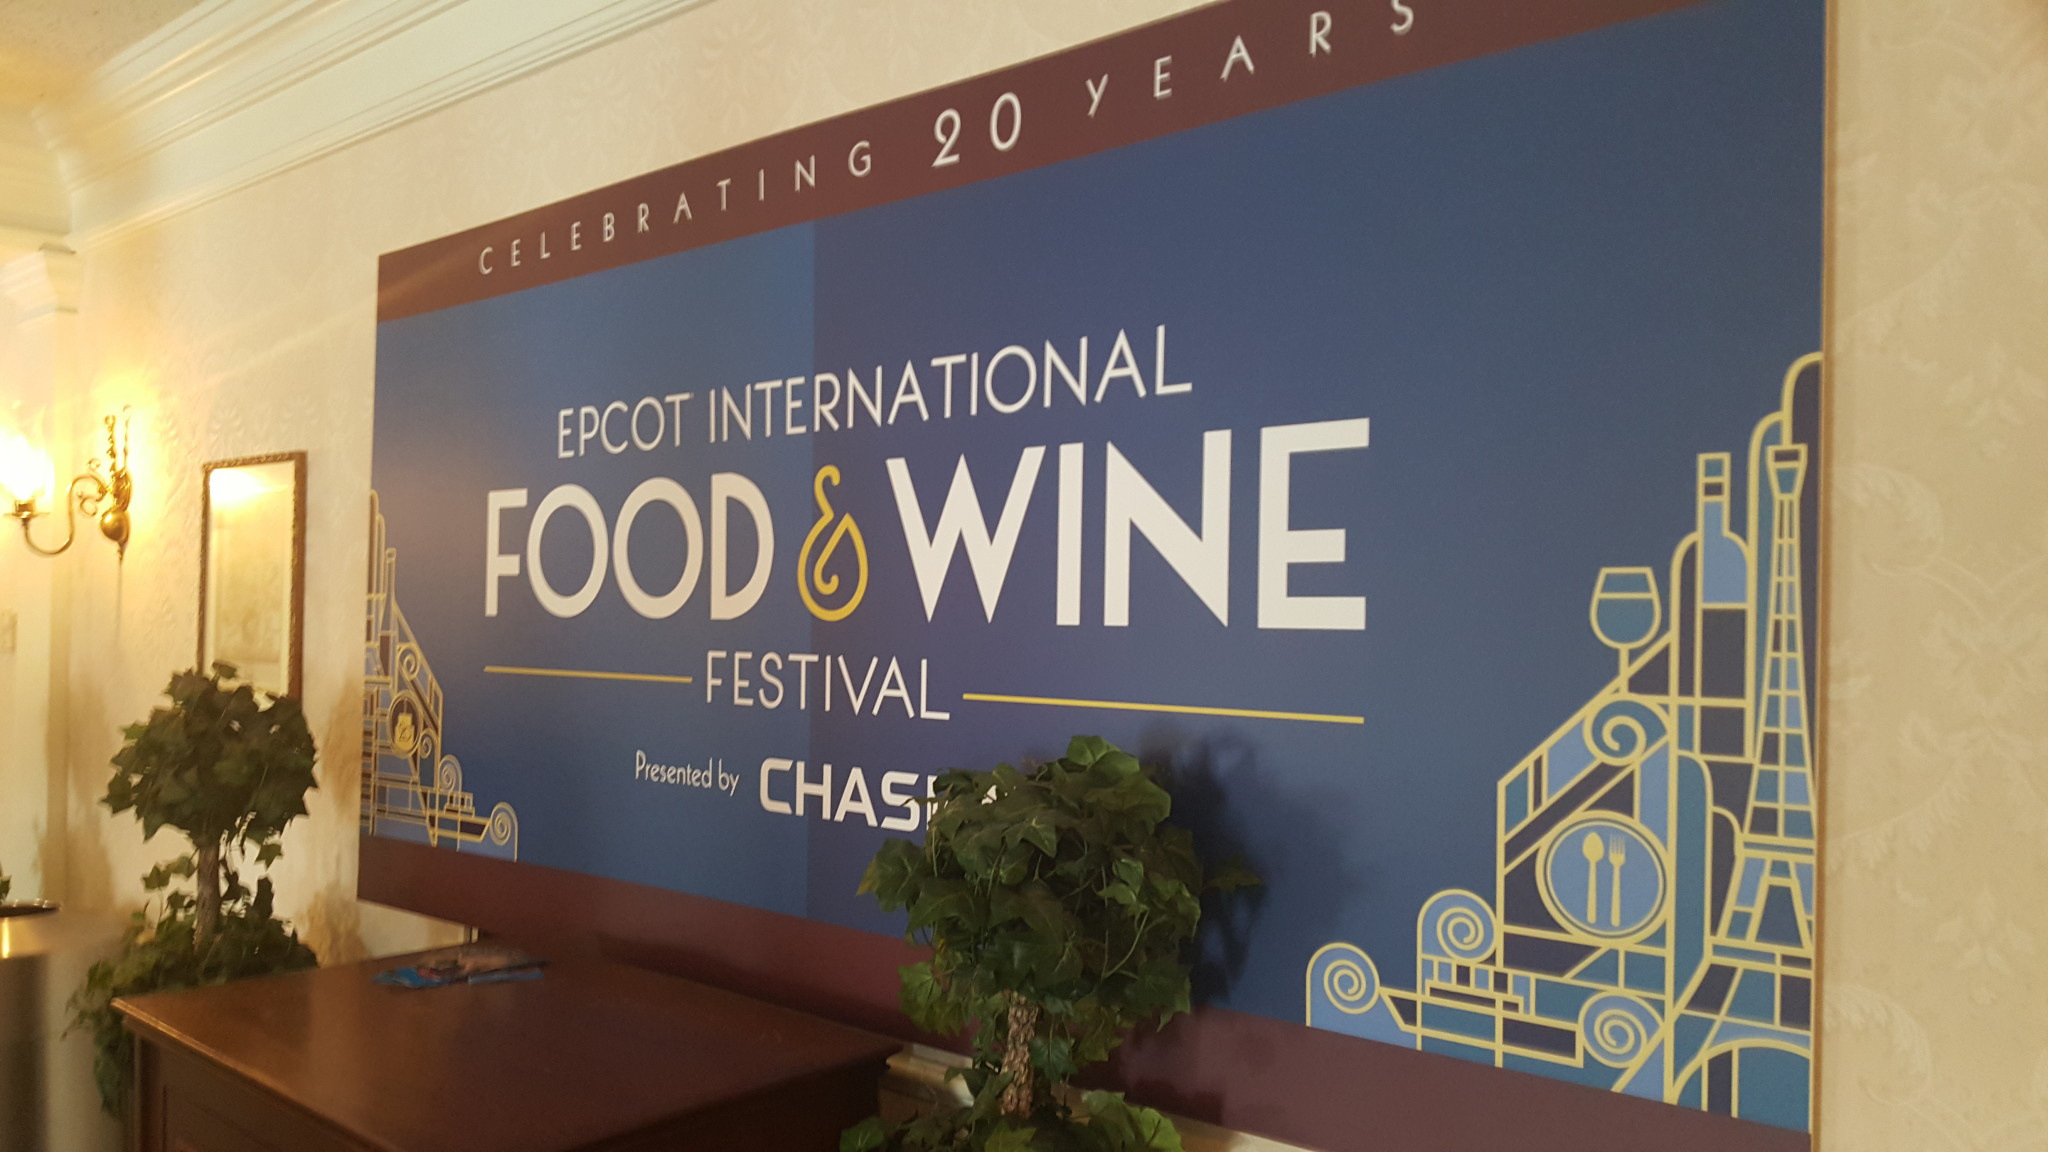 Don’t miss these special amenities for Chase Card Members at the Food & Wine Festival